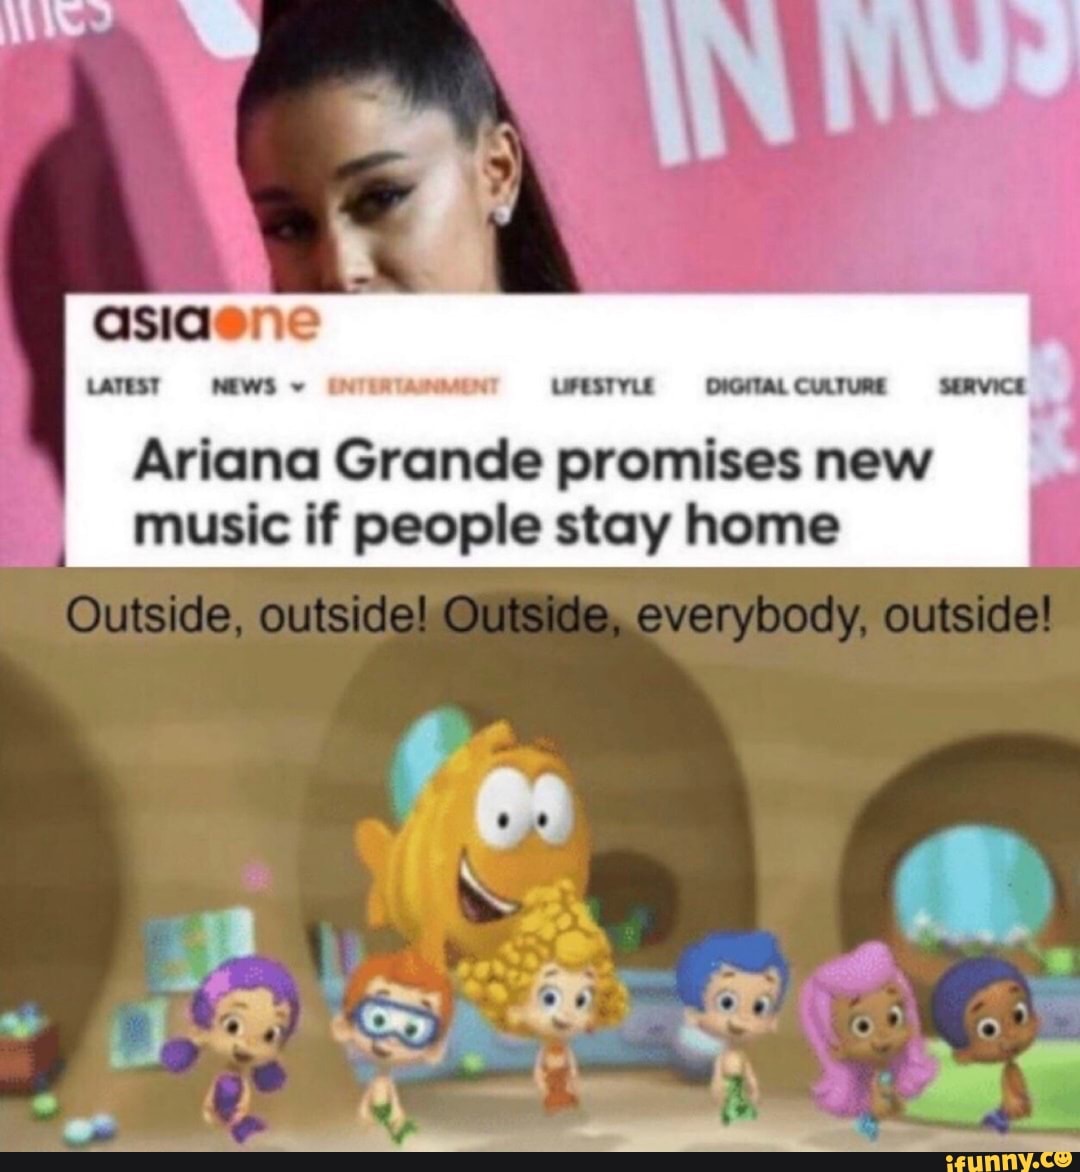 Ariana Grande Anime Porn - Ariana Grande promises new music if people stay home - seo.title